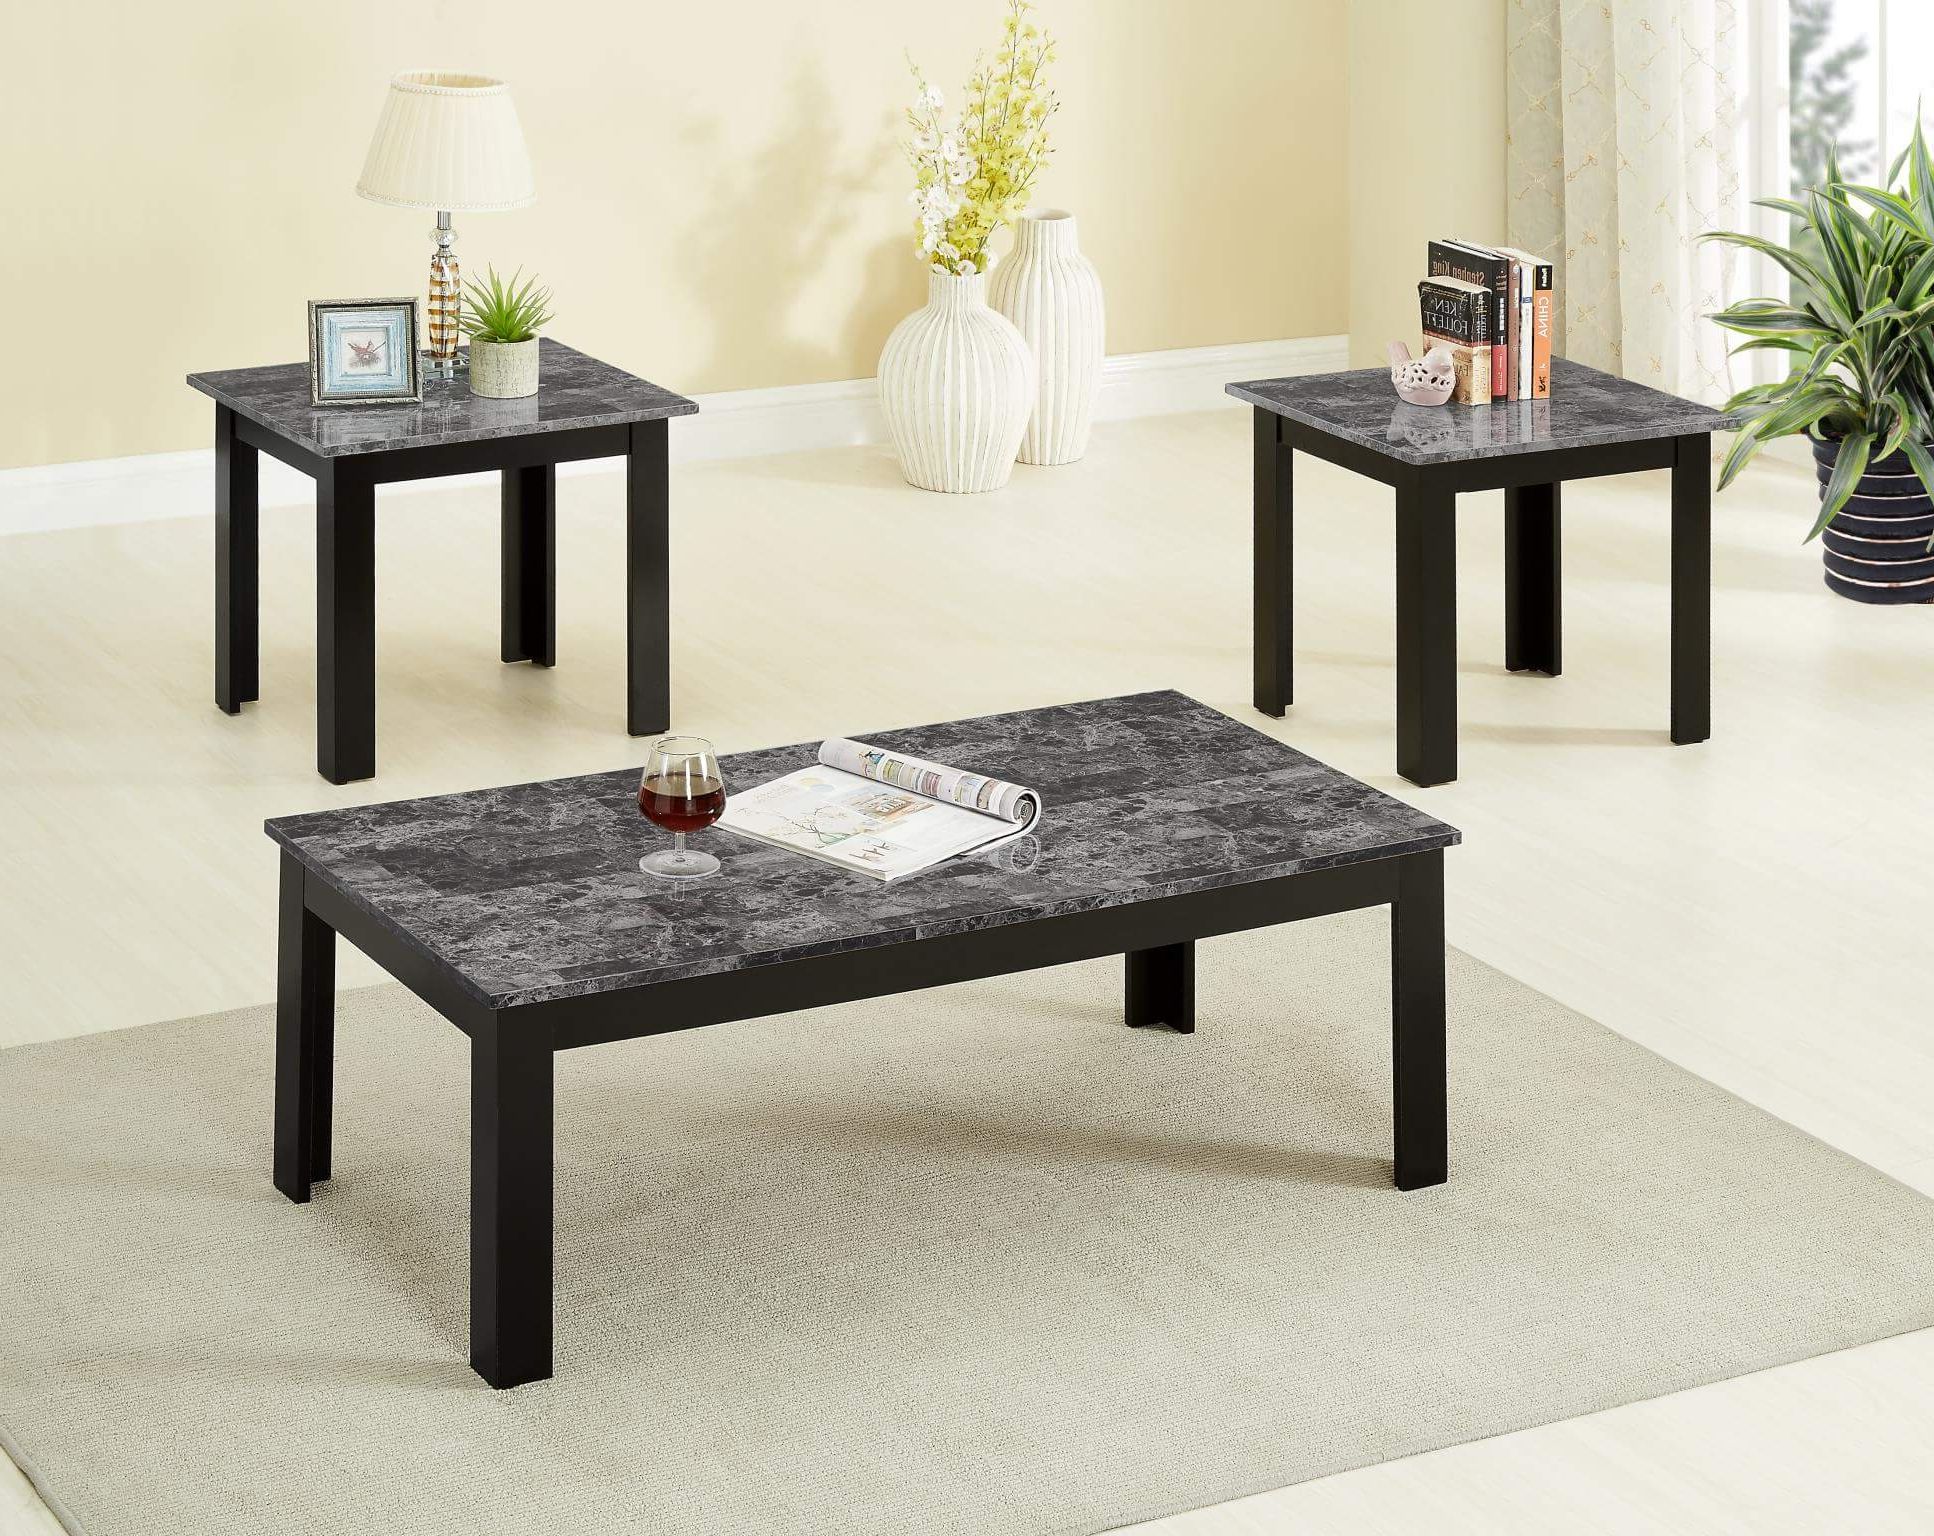 3 Piece Black Faux Marble Coffee And End Table Set In Well Known Marble Coffee Tables Set Of 2 (Gallery 12 of 20)